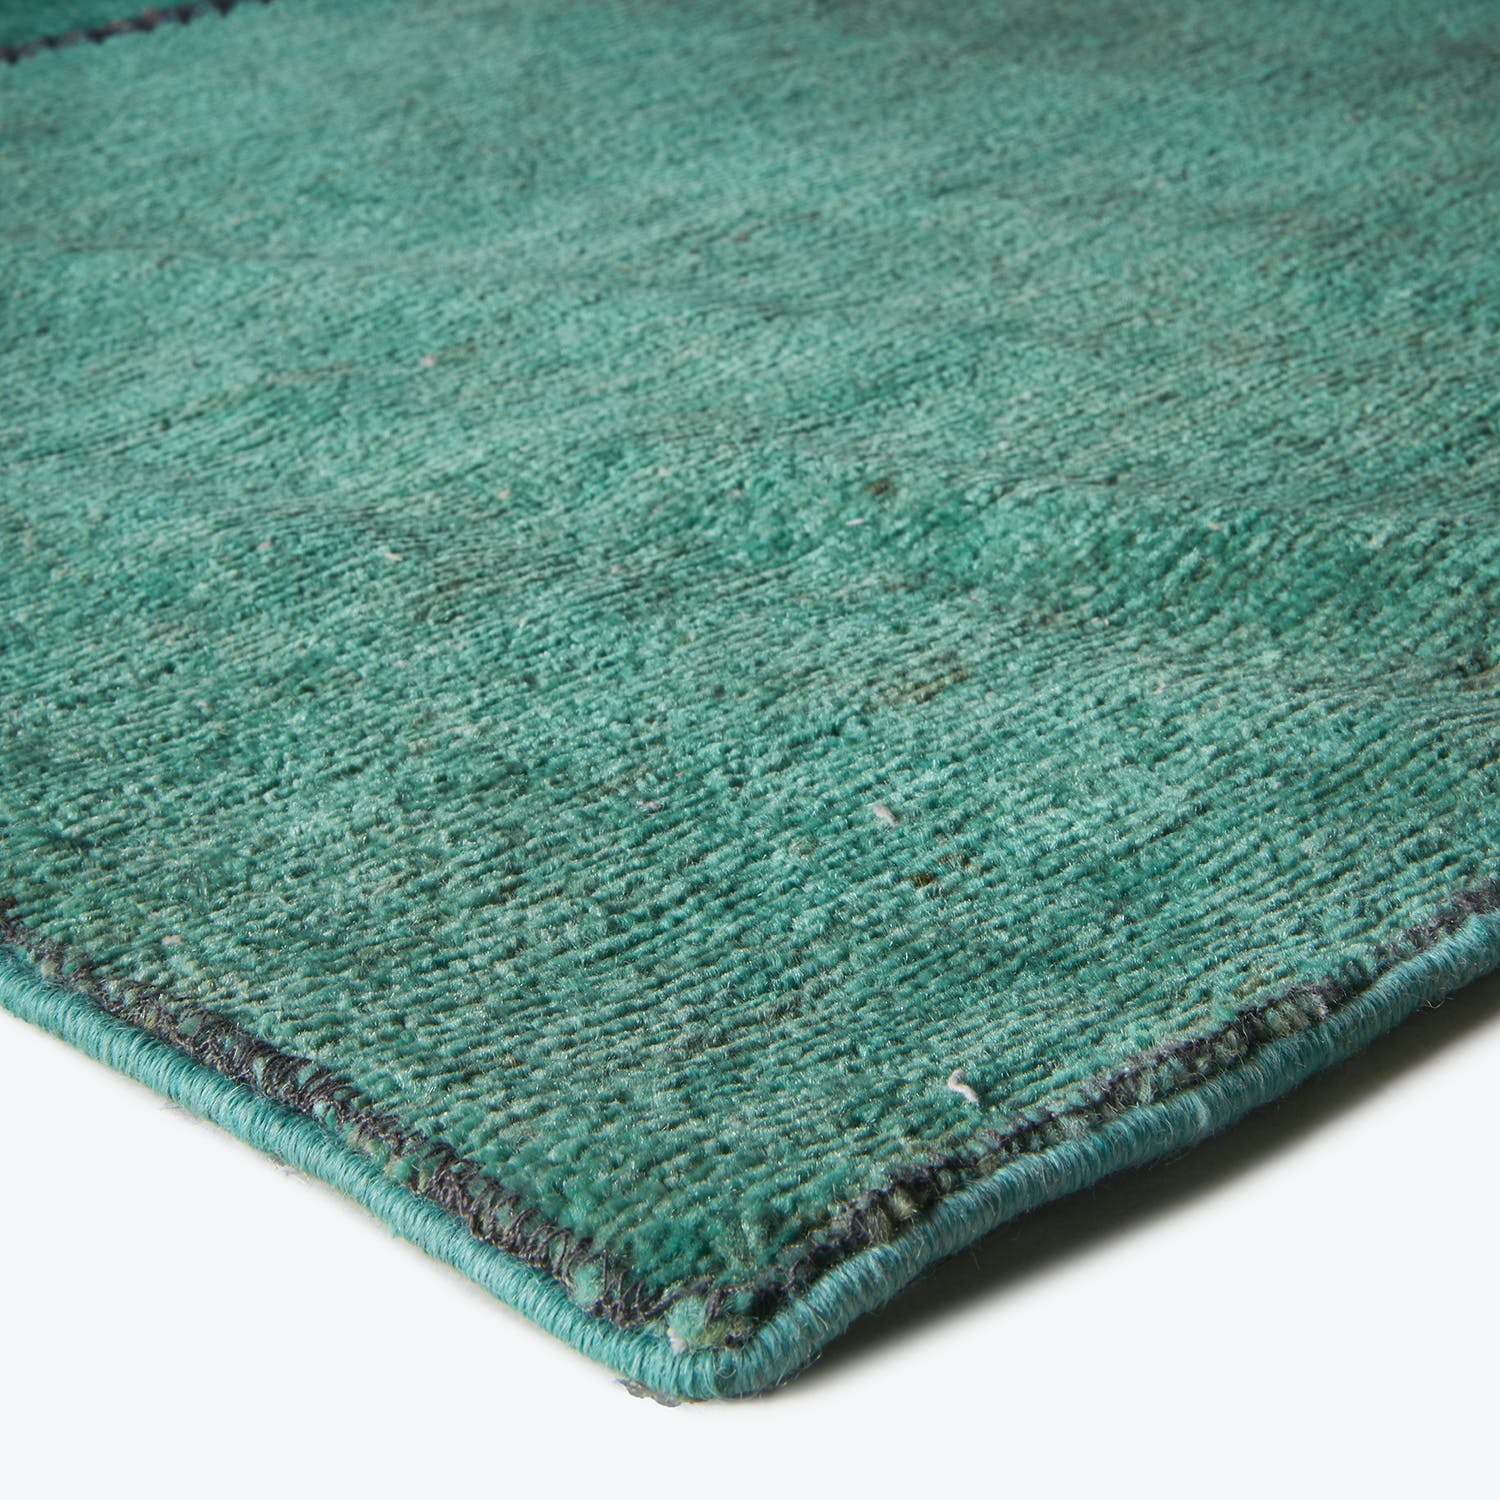 Close-up of a green carpet with visible textured fibers.